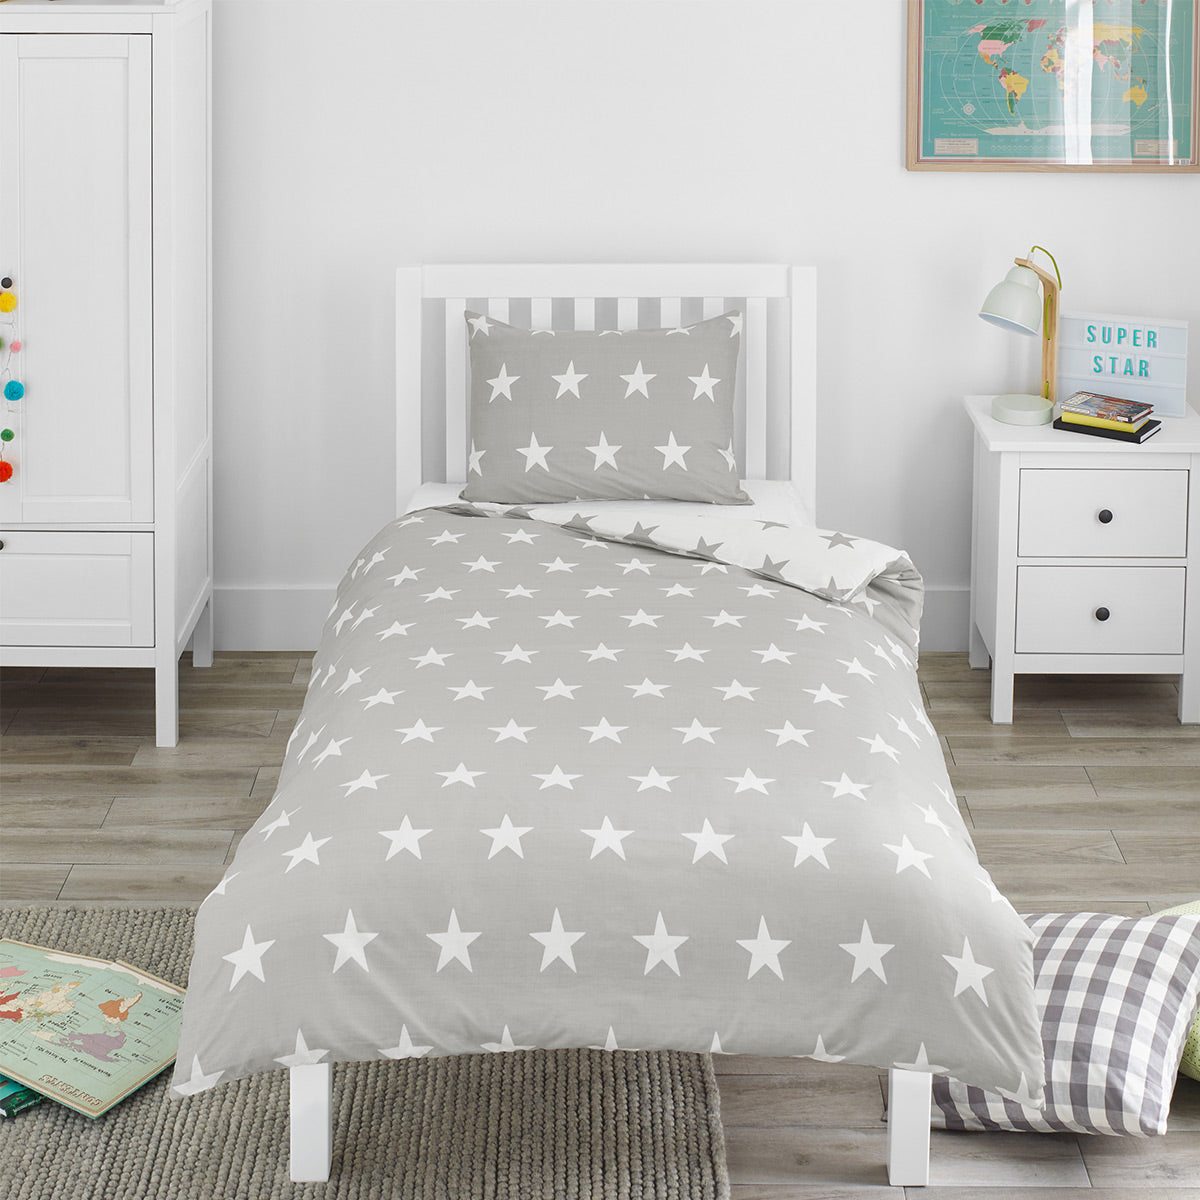 Bloomsbury Mill Grey & White Stars Cot Bed Duvet Cover